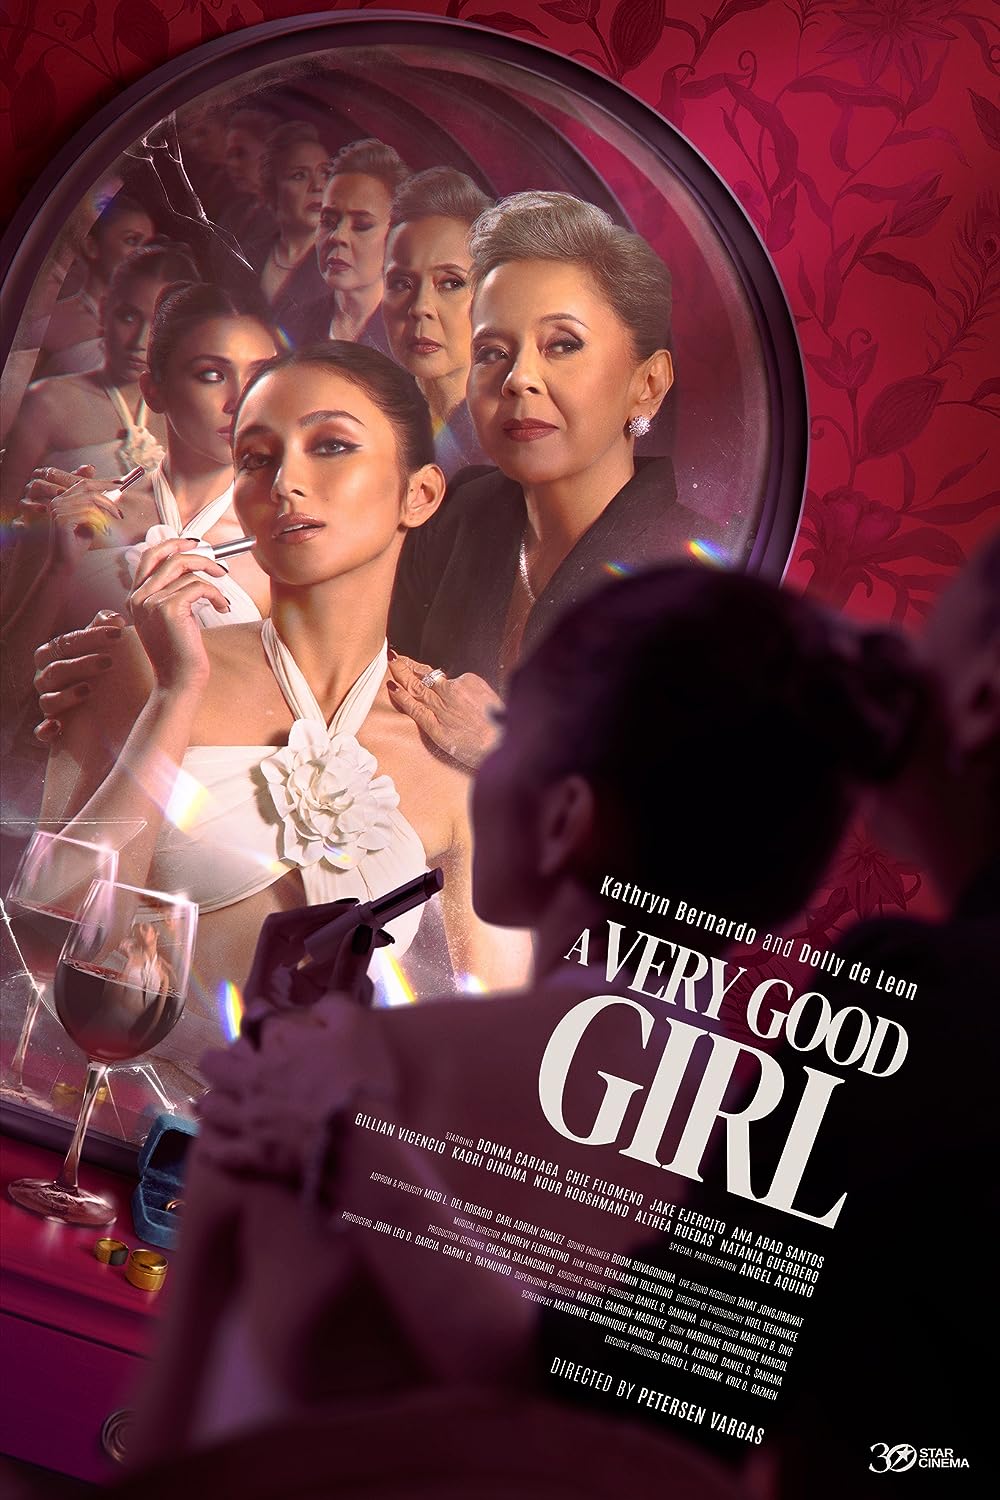 A Very Good Girl (December 27) - Streaming on NetflixA Very Good Girl follows Philo, a sophisticated socialite seeking retribution against a business magnate, only to confront an unexpected realization about her own role in the conflict.